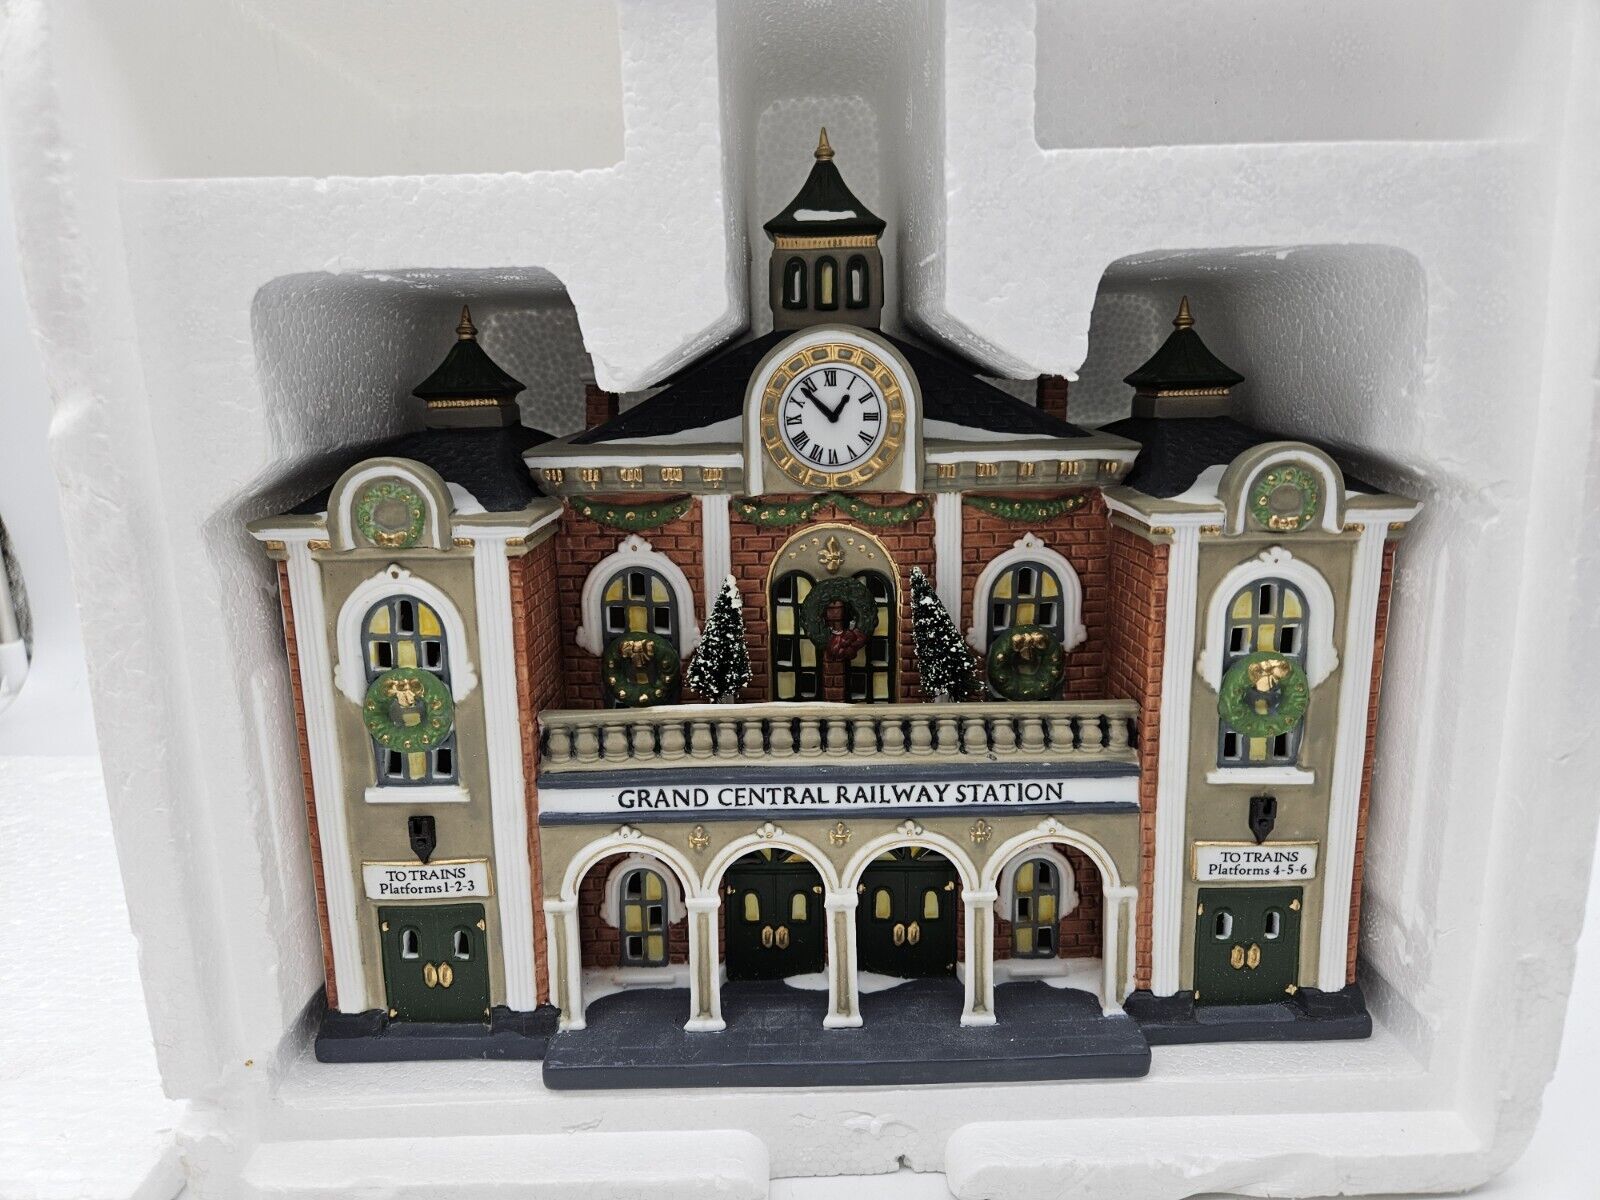 Dept 56 Christmas In The City Series Grand Central Railway Station